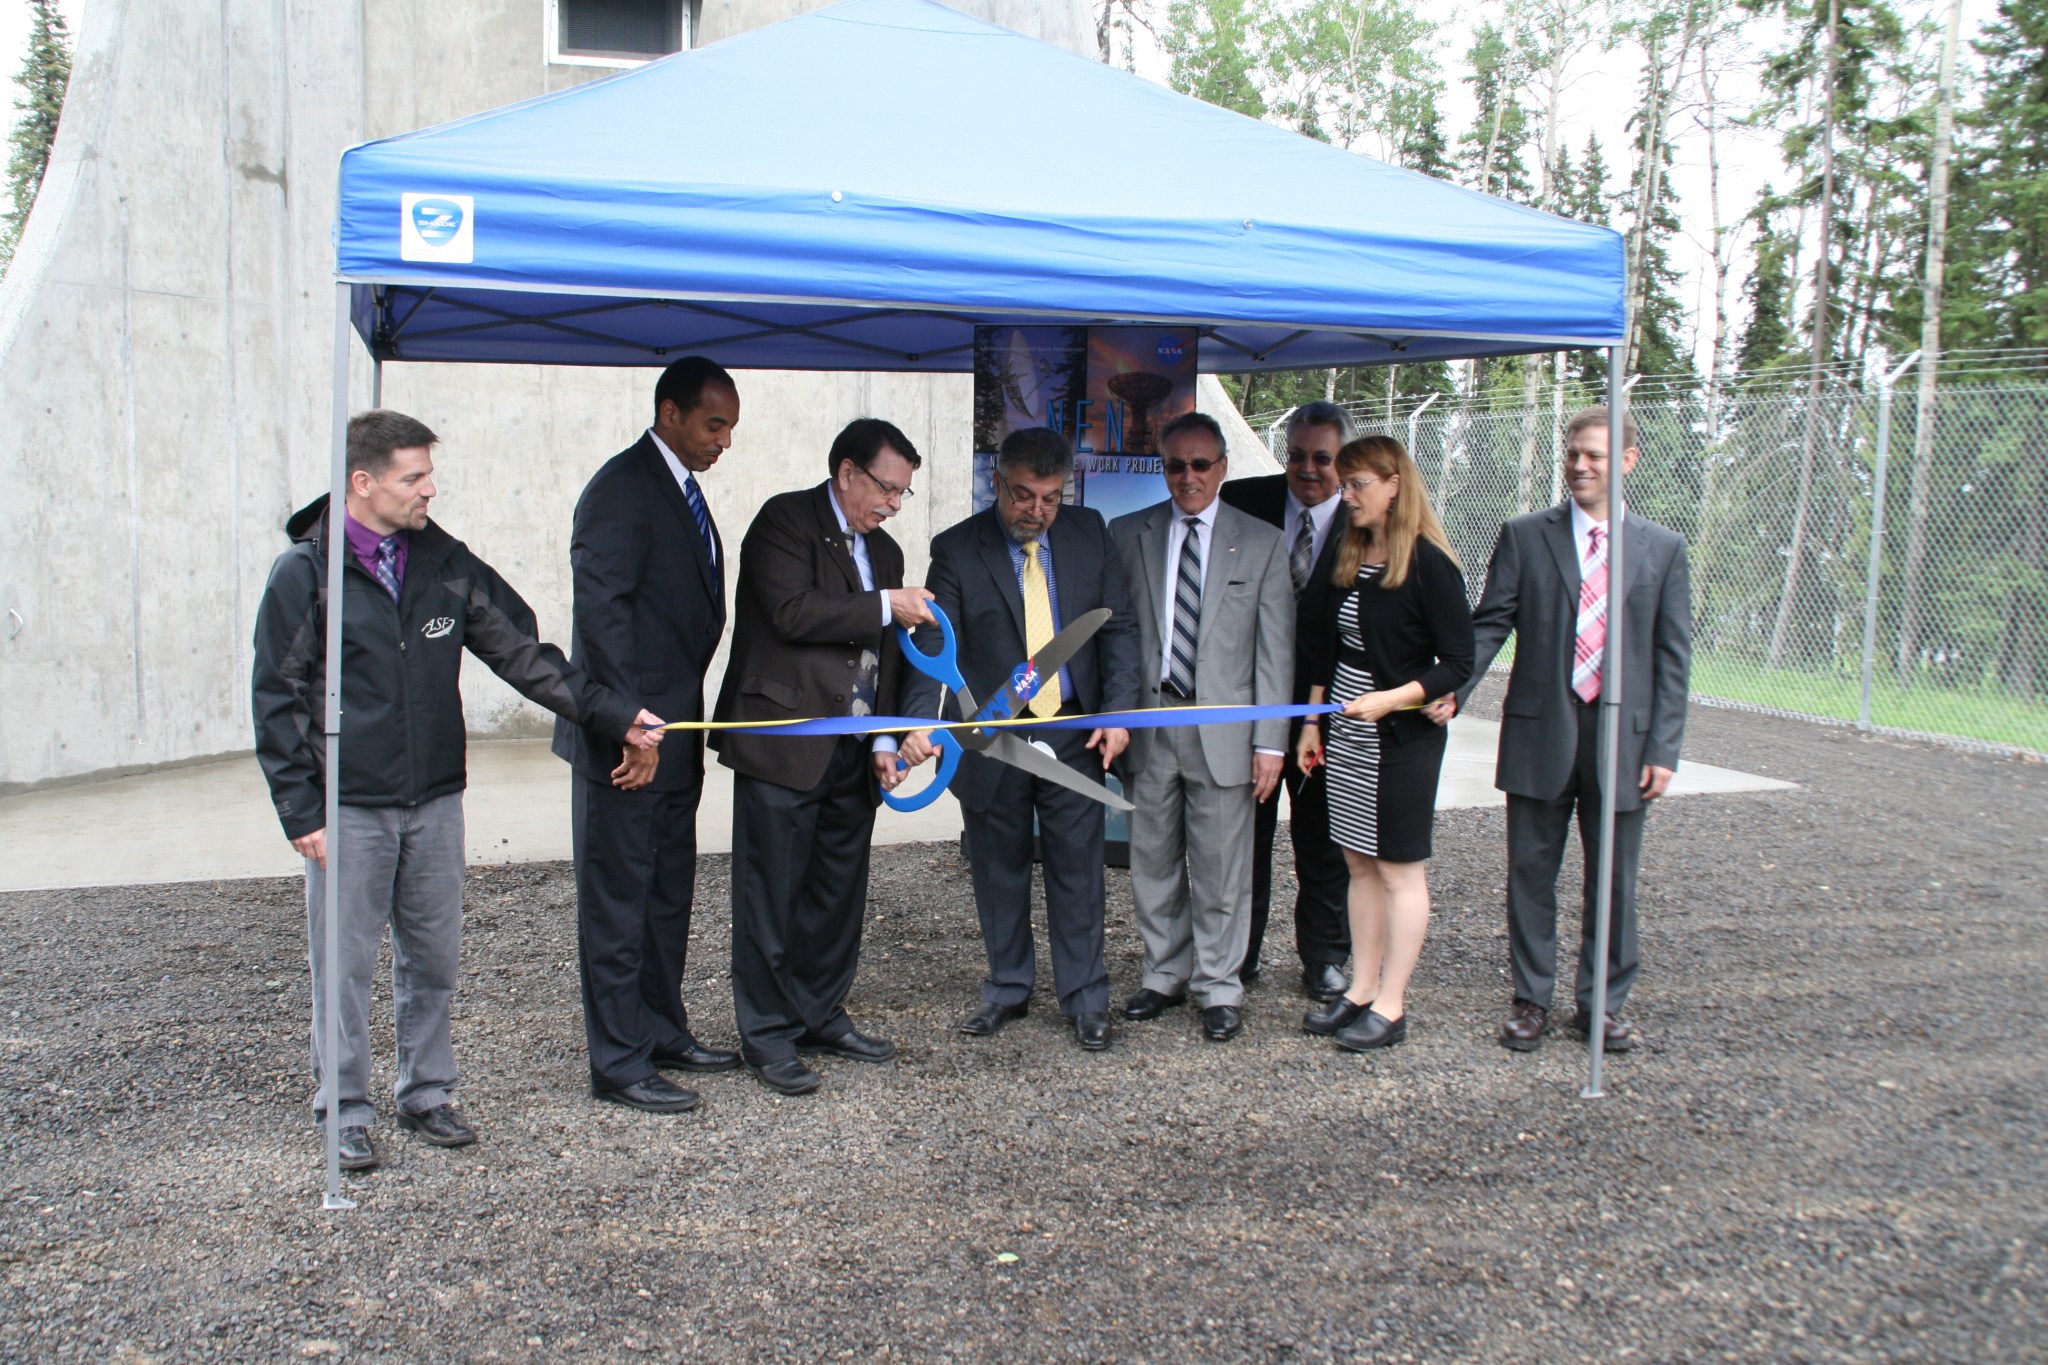 7 men and one woman at a ribbon cutting ceremony in the rain under a blue tent. 